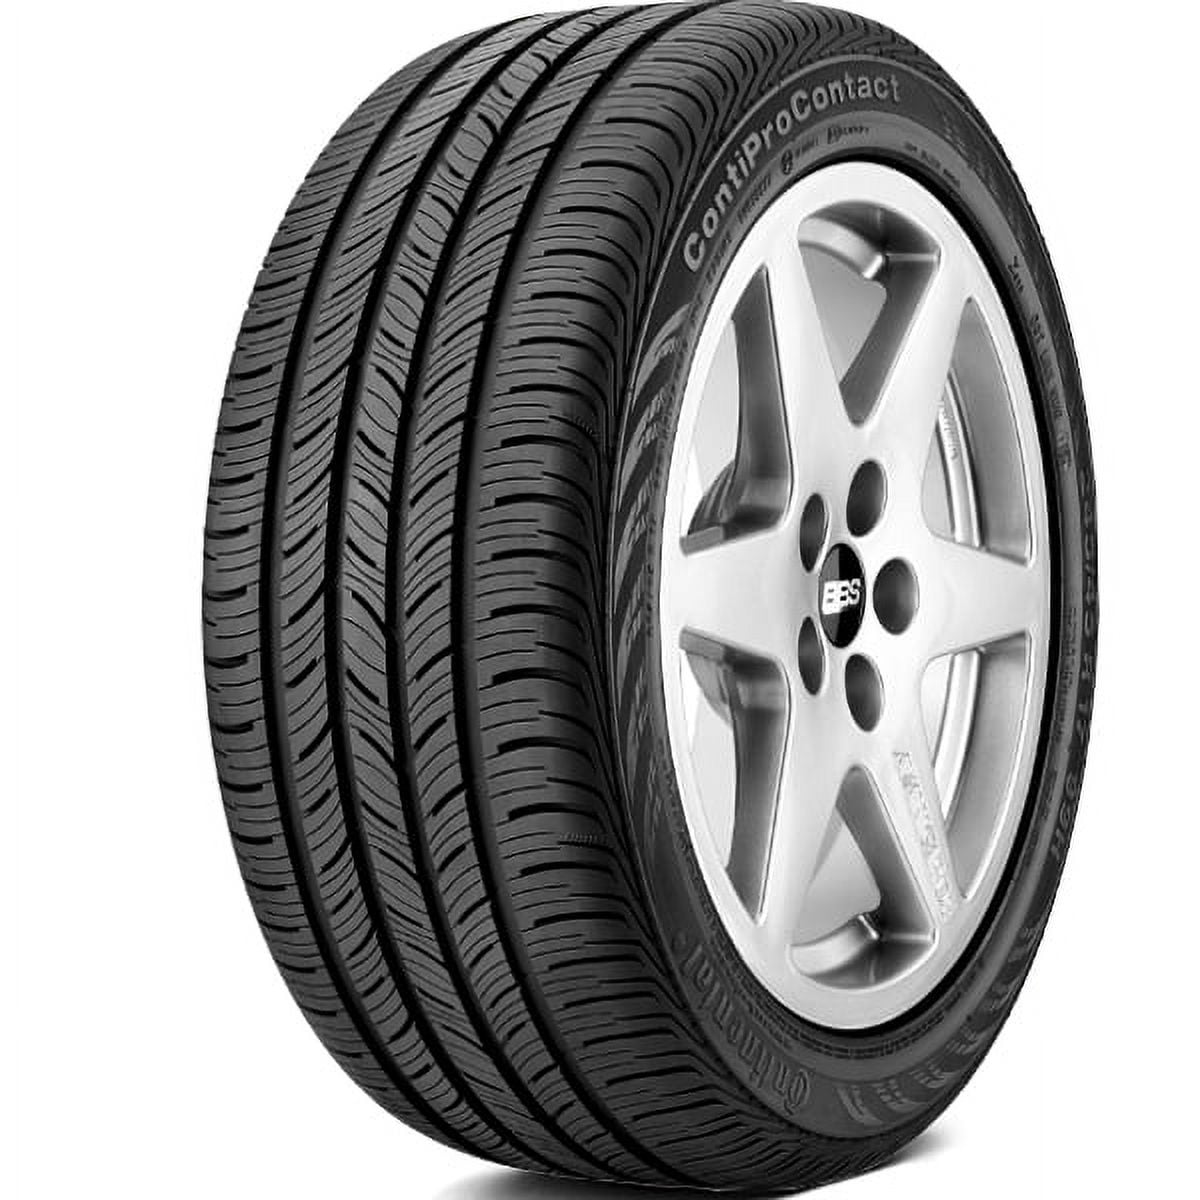 Continental ContiProContact 205/50R17 89V BSW Tire All Season